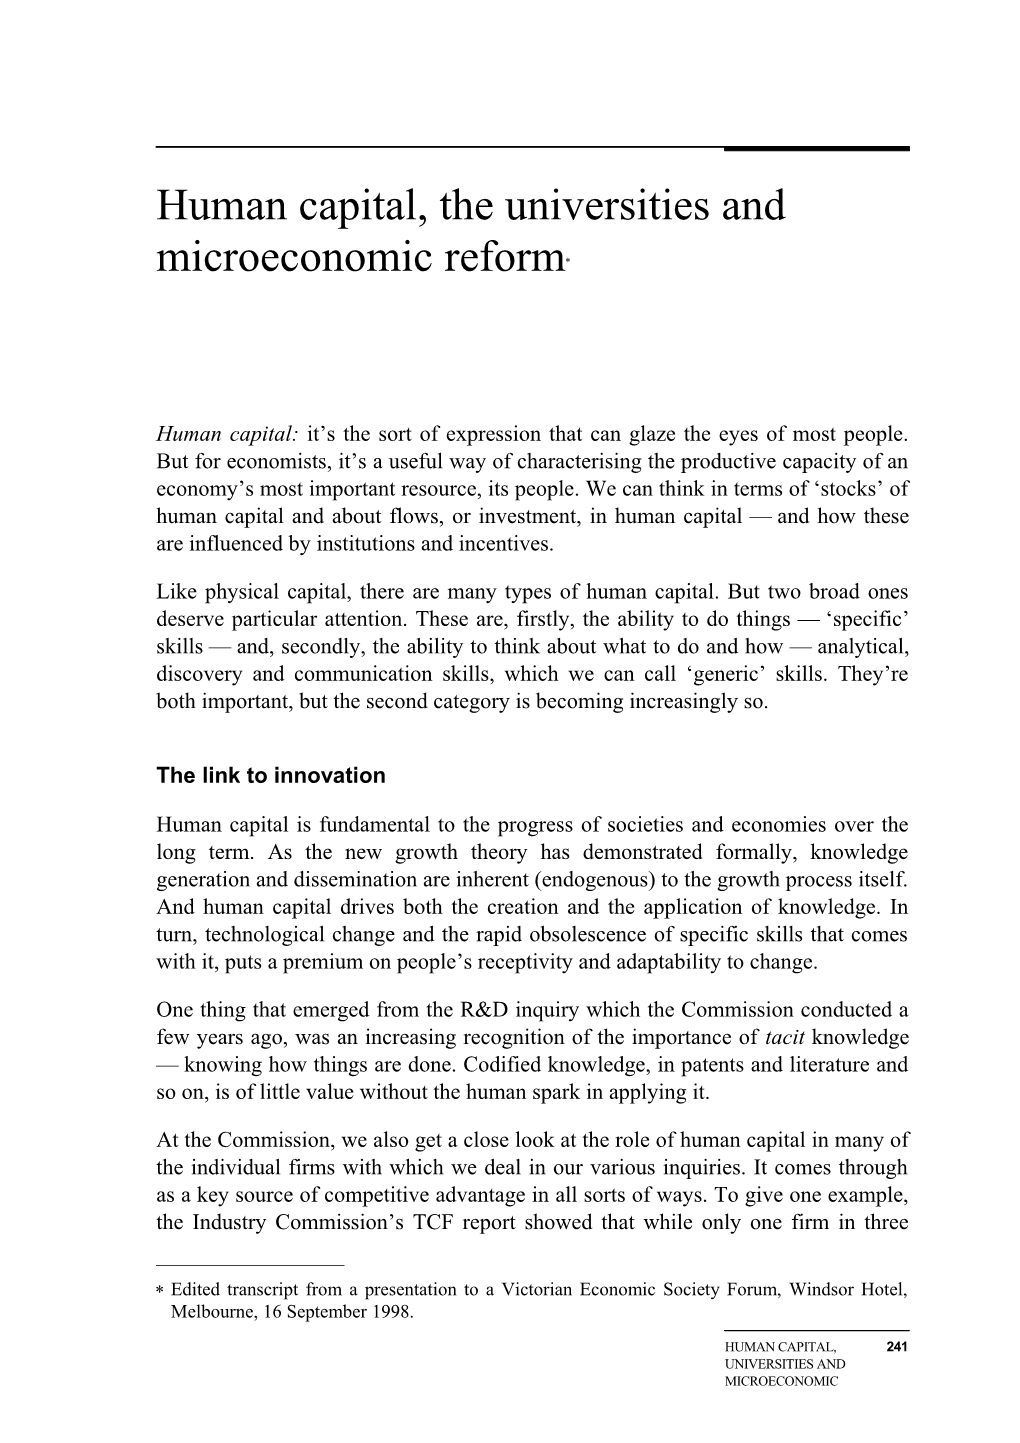 Human Capital, the Universities and Microeconomic Reform